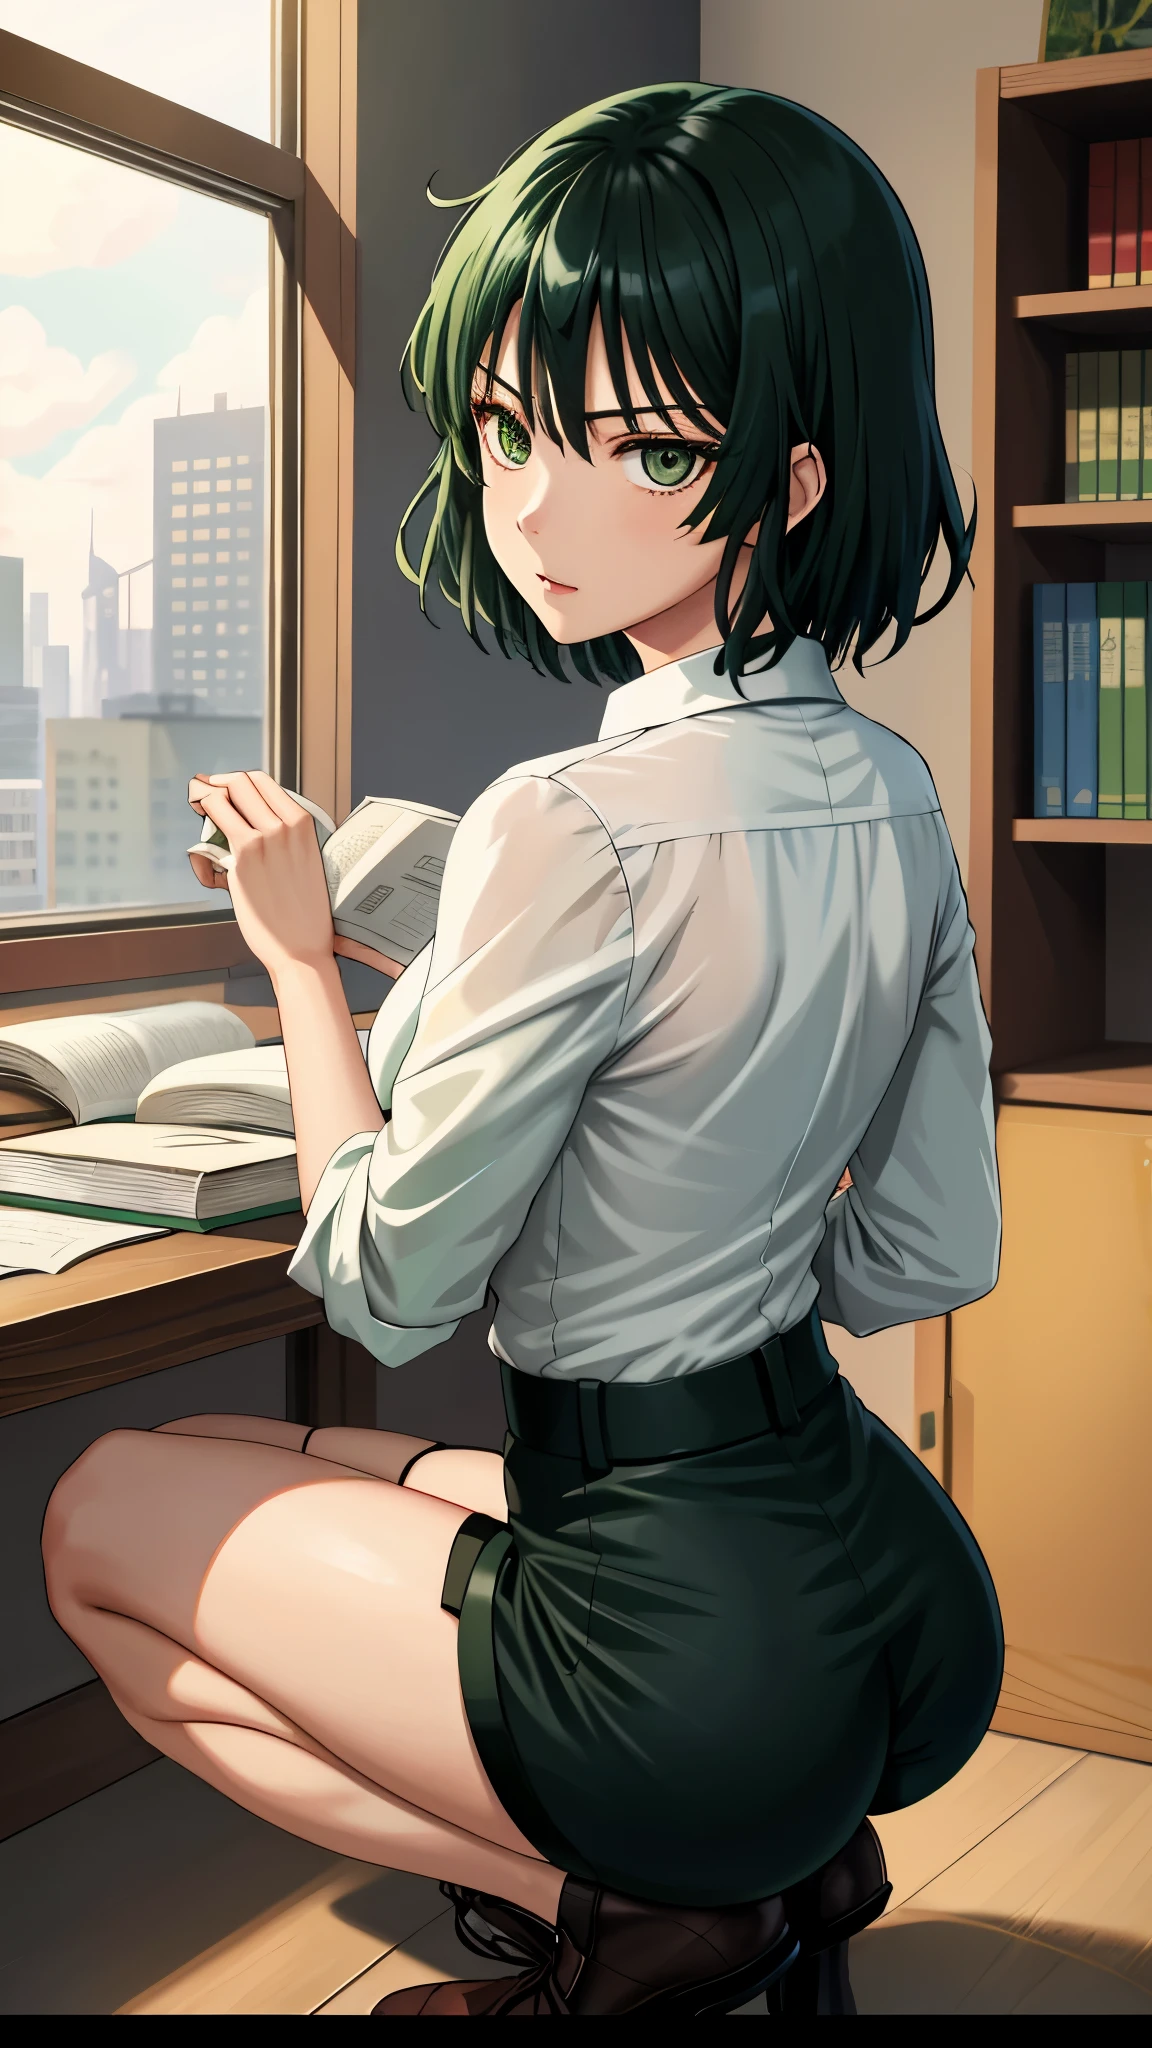 Anime screenshots, City, 1 girl, Alone of, Dark green hair, green eyes, looking at the audience, of, Keep your mouth shut, yes, wide hips, White shirt, shorts, Unbutton shorts, Squatting, , Books and periodicals, Back